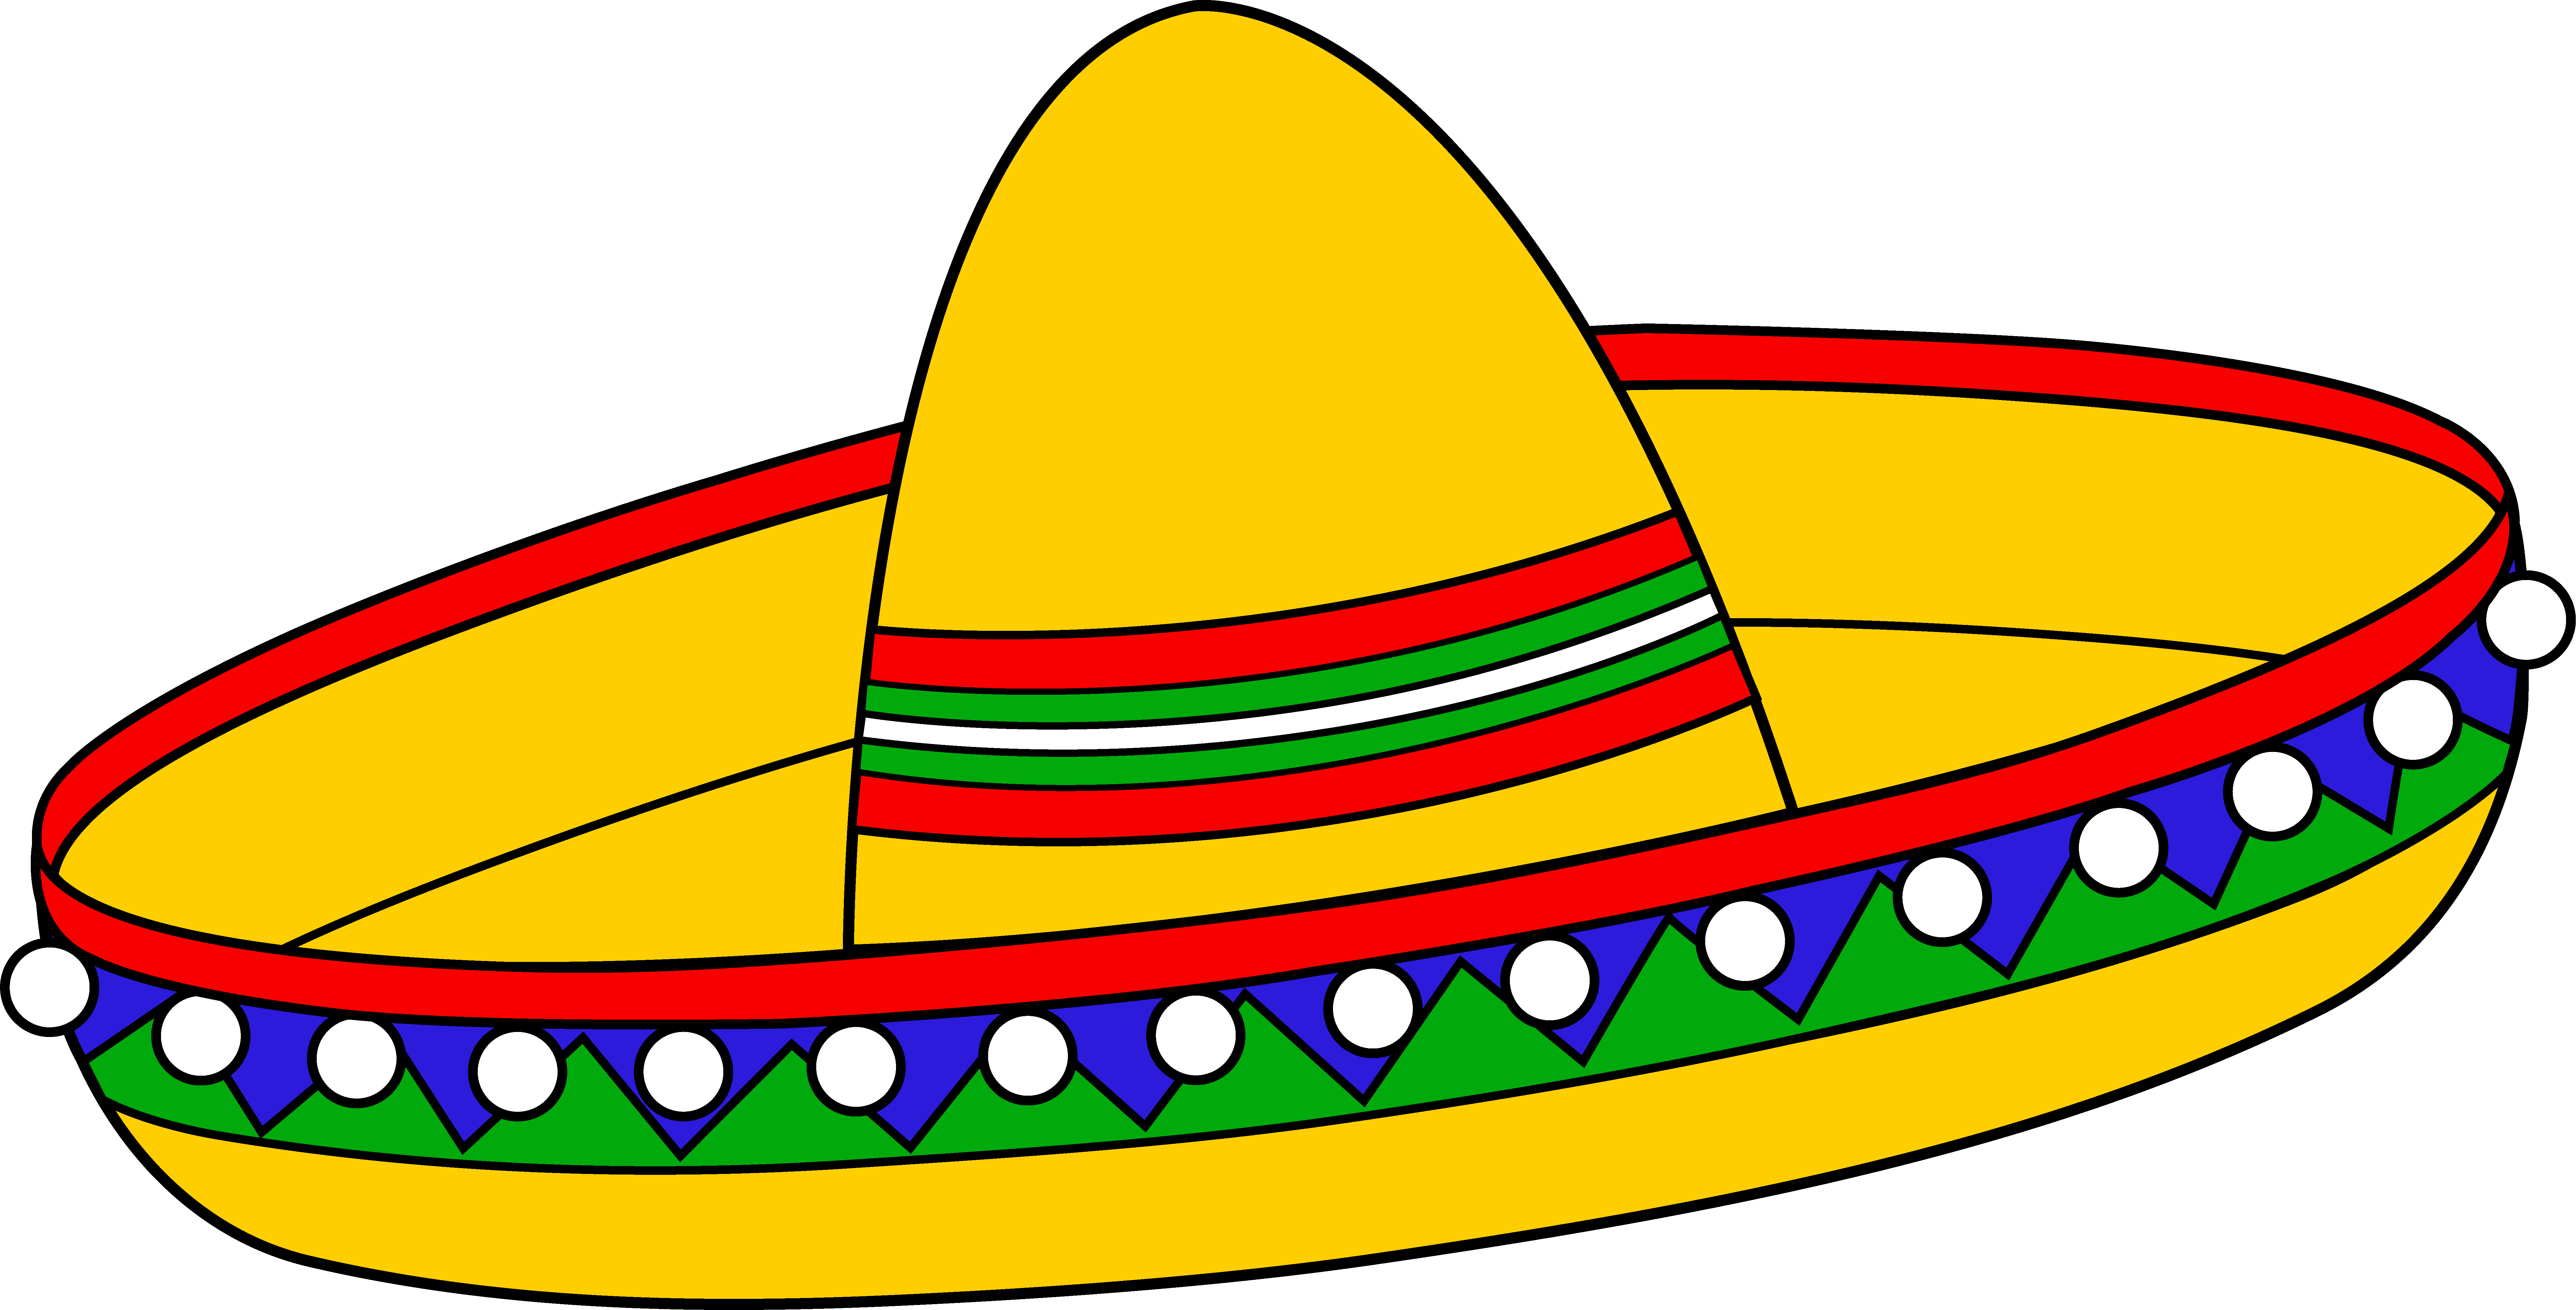 Mexican sombrero hat free. Youtube clipart colorful